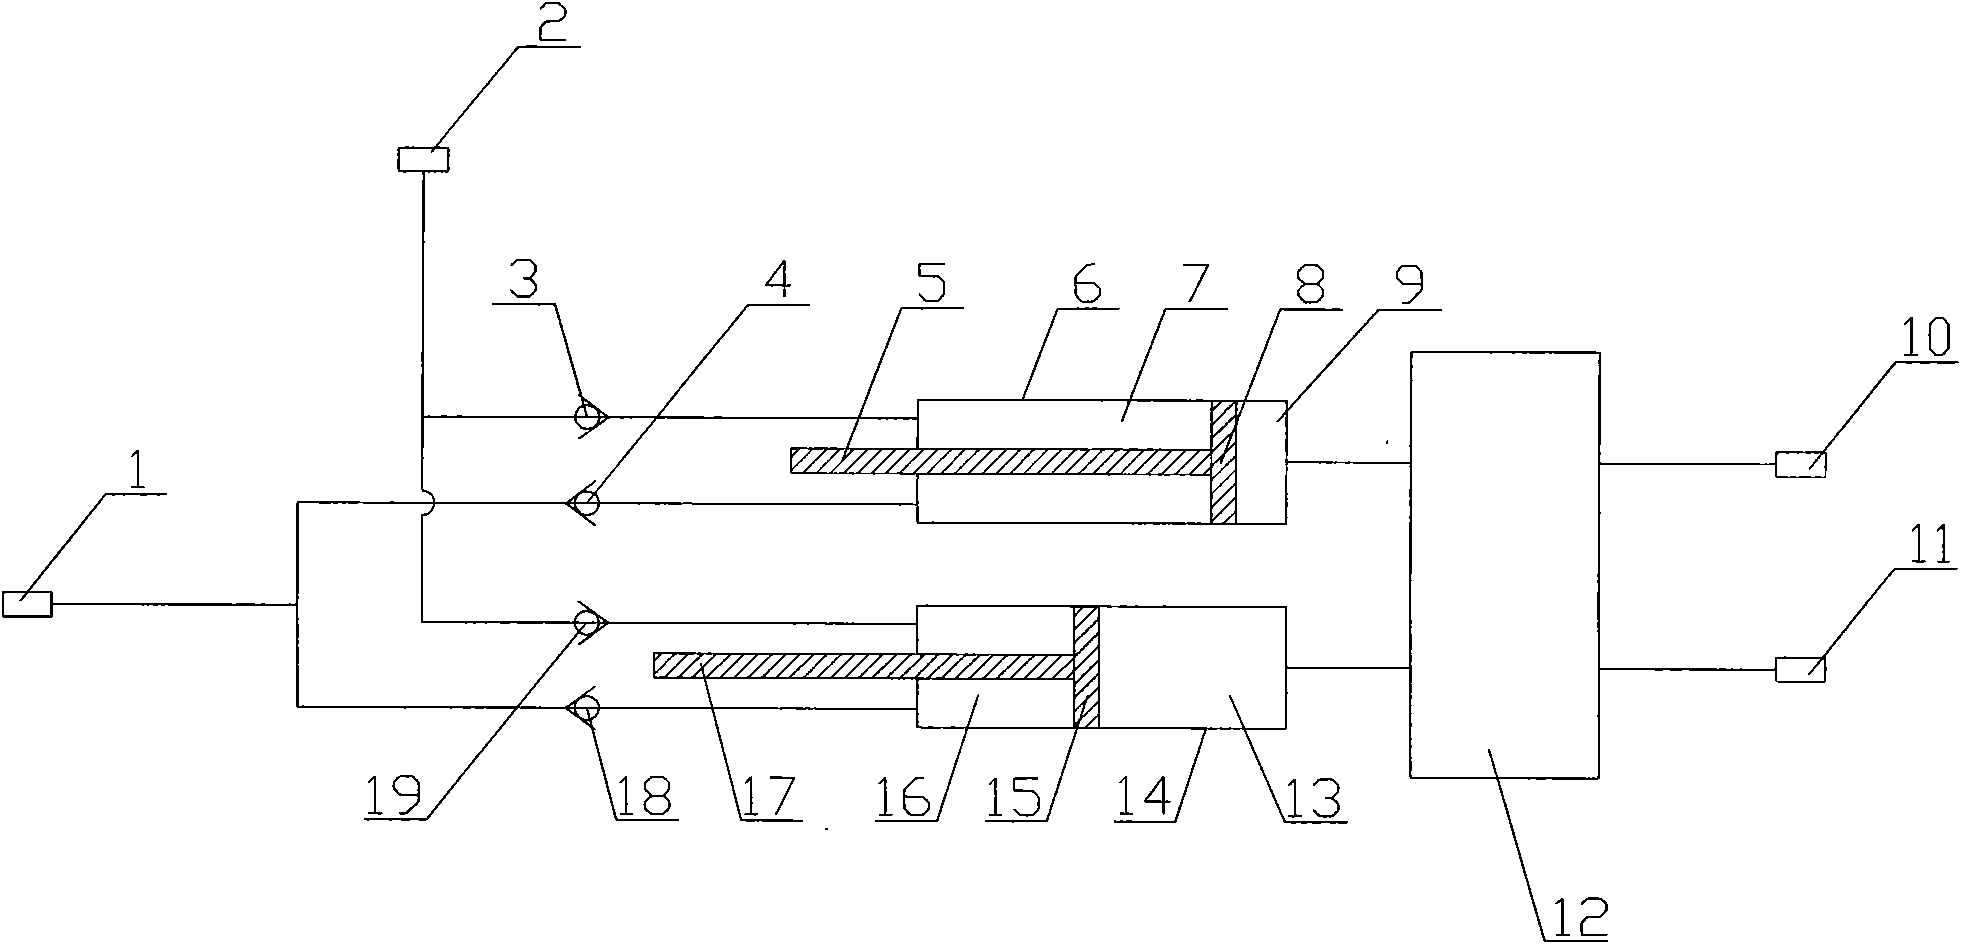 Differential energy recovery device and method for seawater desalination system